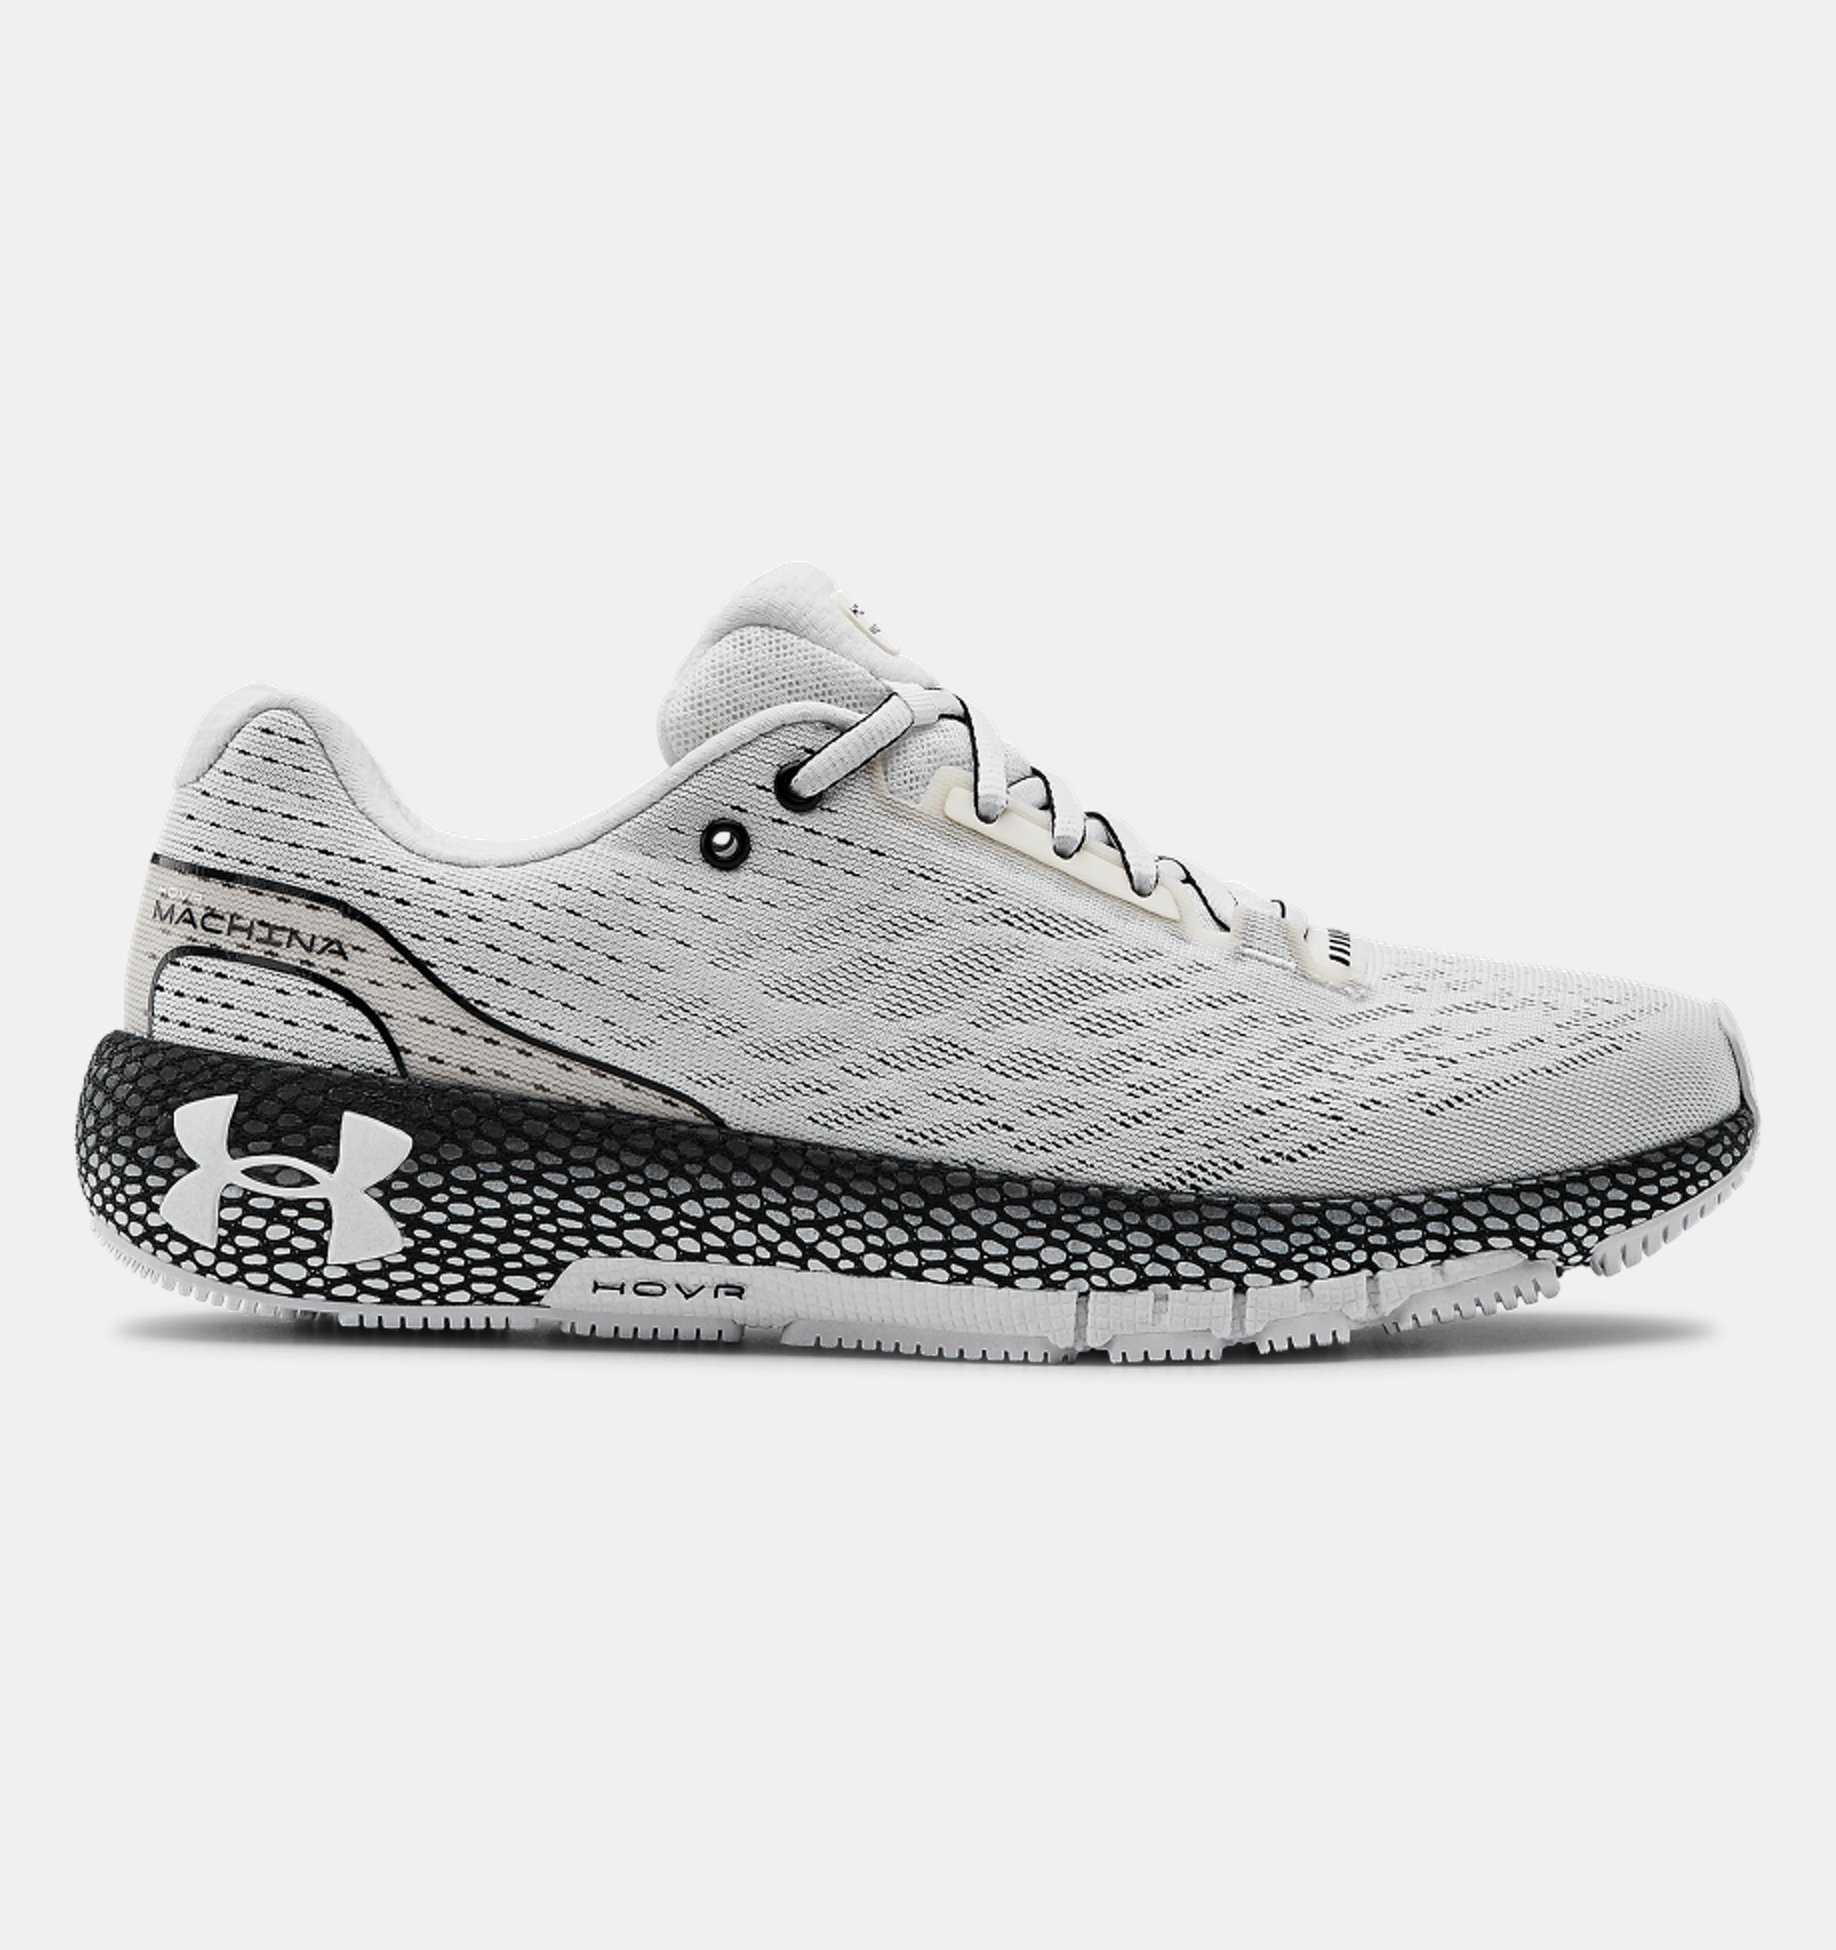 Under Armour's Best Shoes for Your Next Run! – FX Physical Therapy